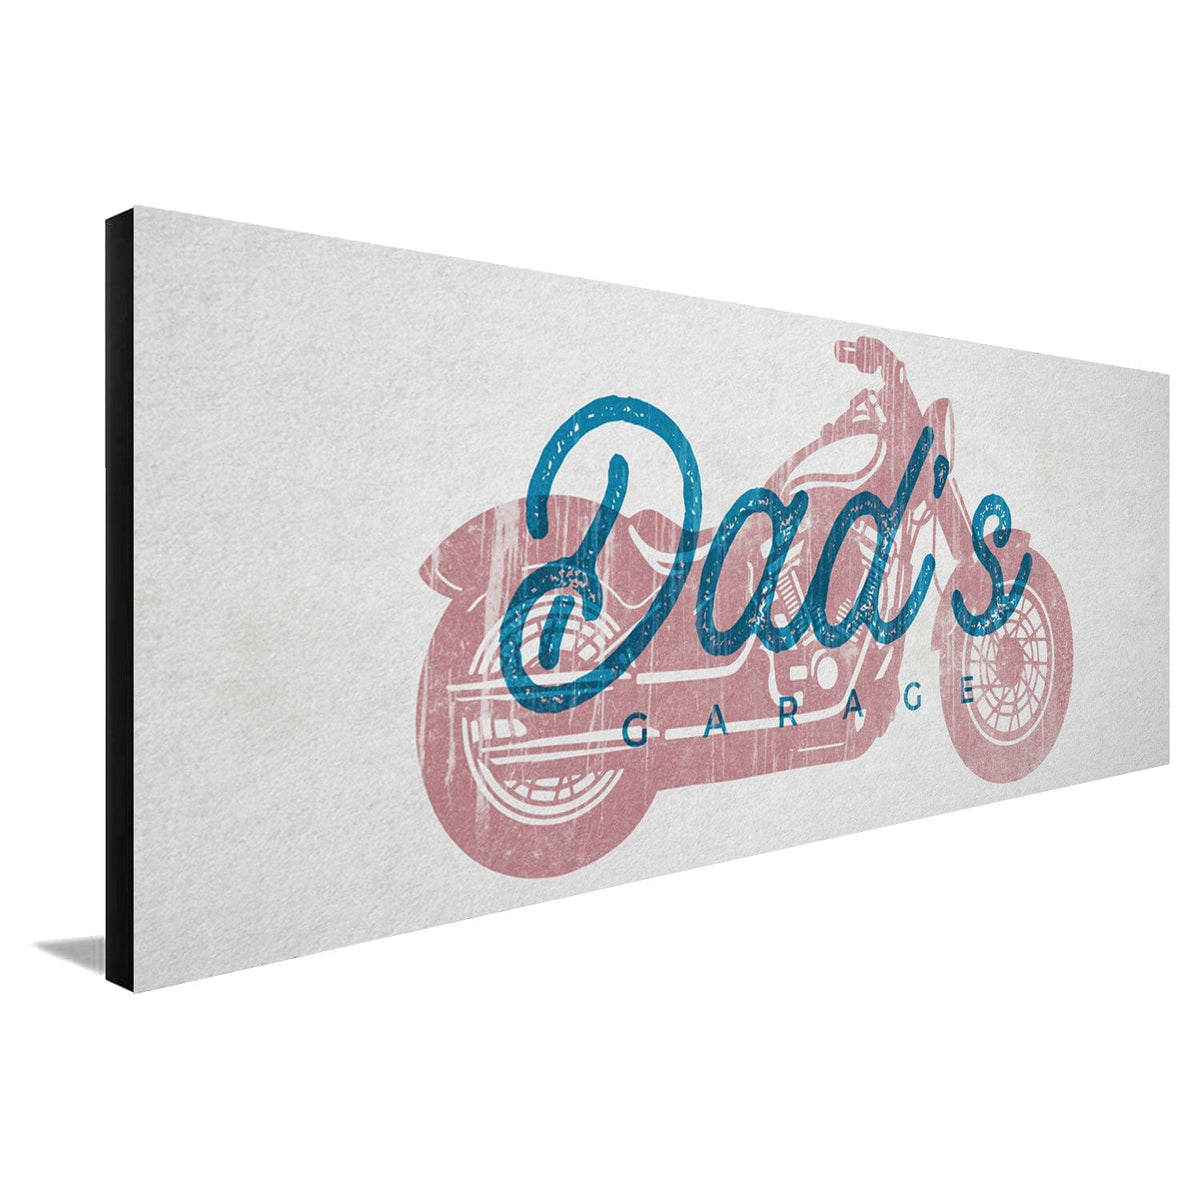 Personalized motorcycle garage sign